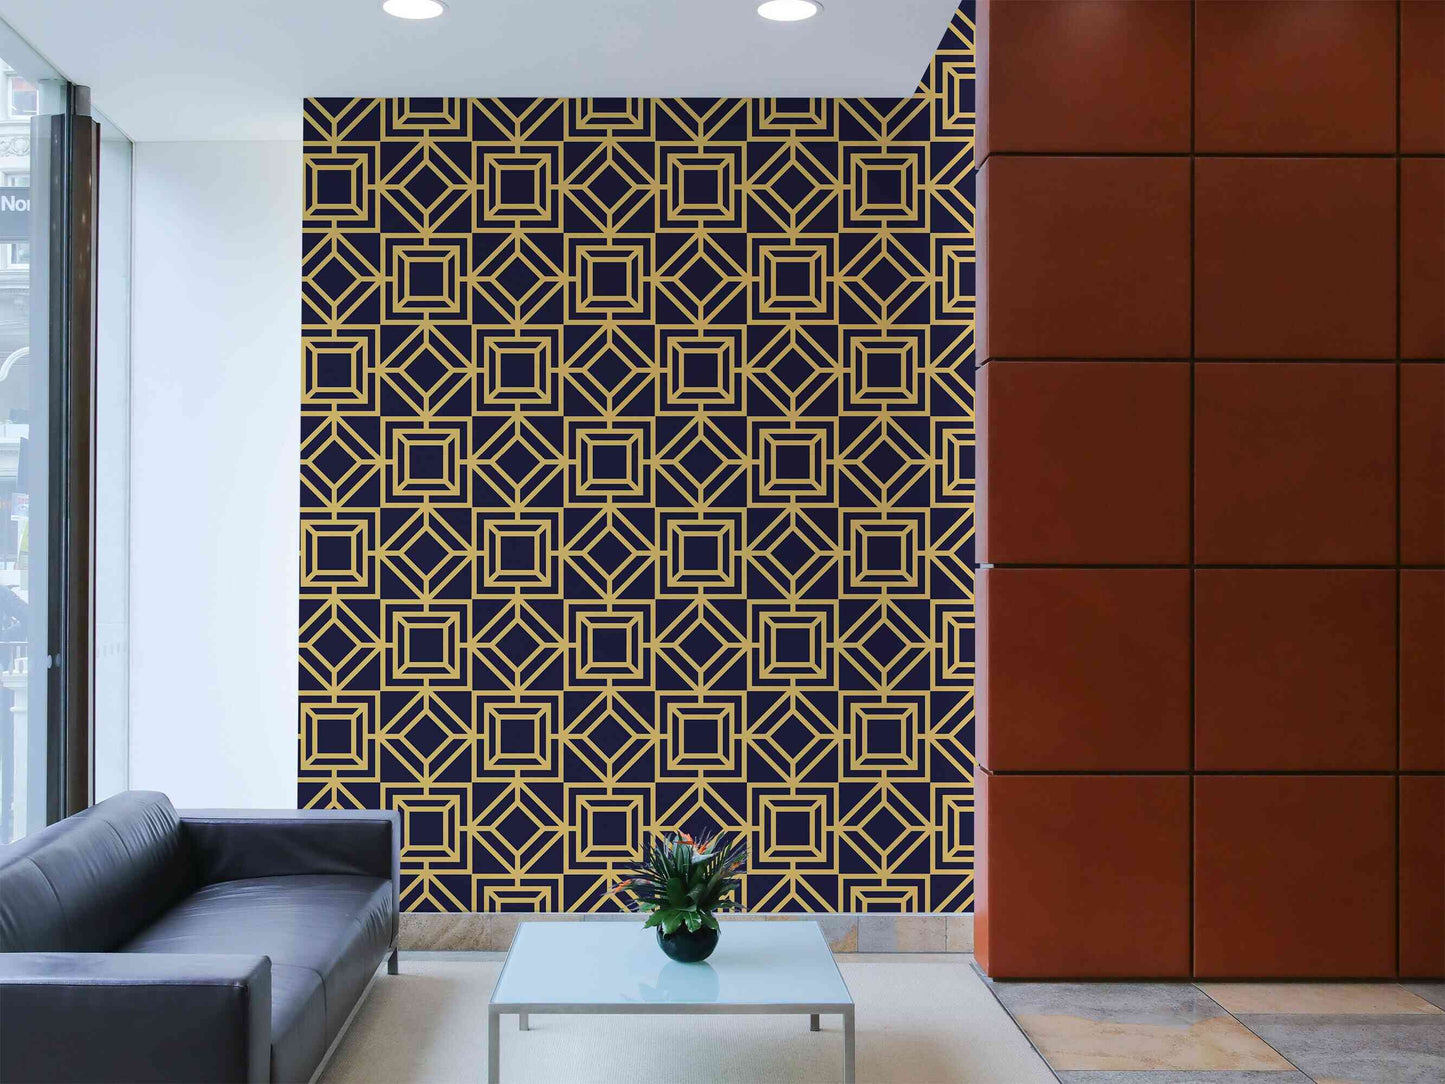 Easy-to-apply luxury wallpaper, perfect for quick interior transformations.